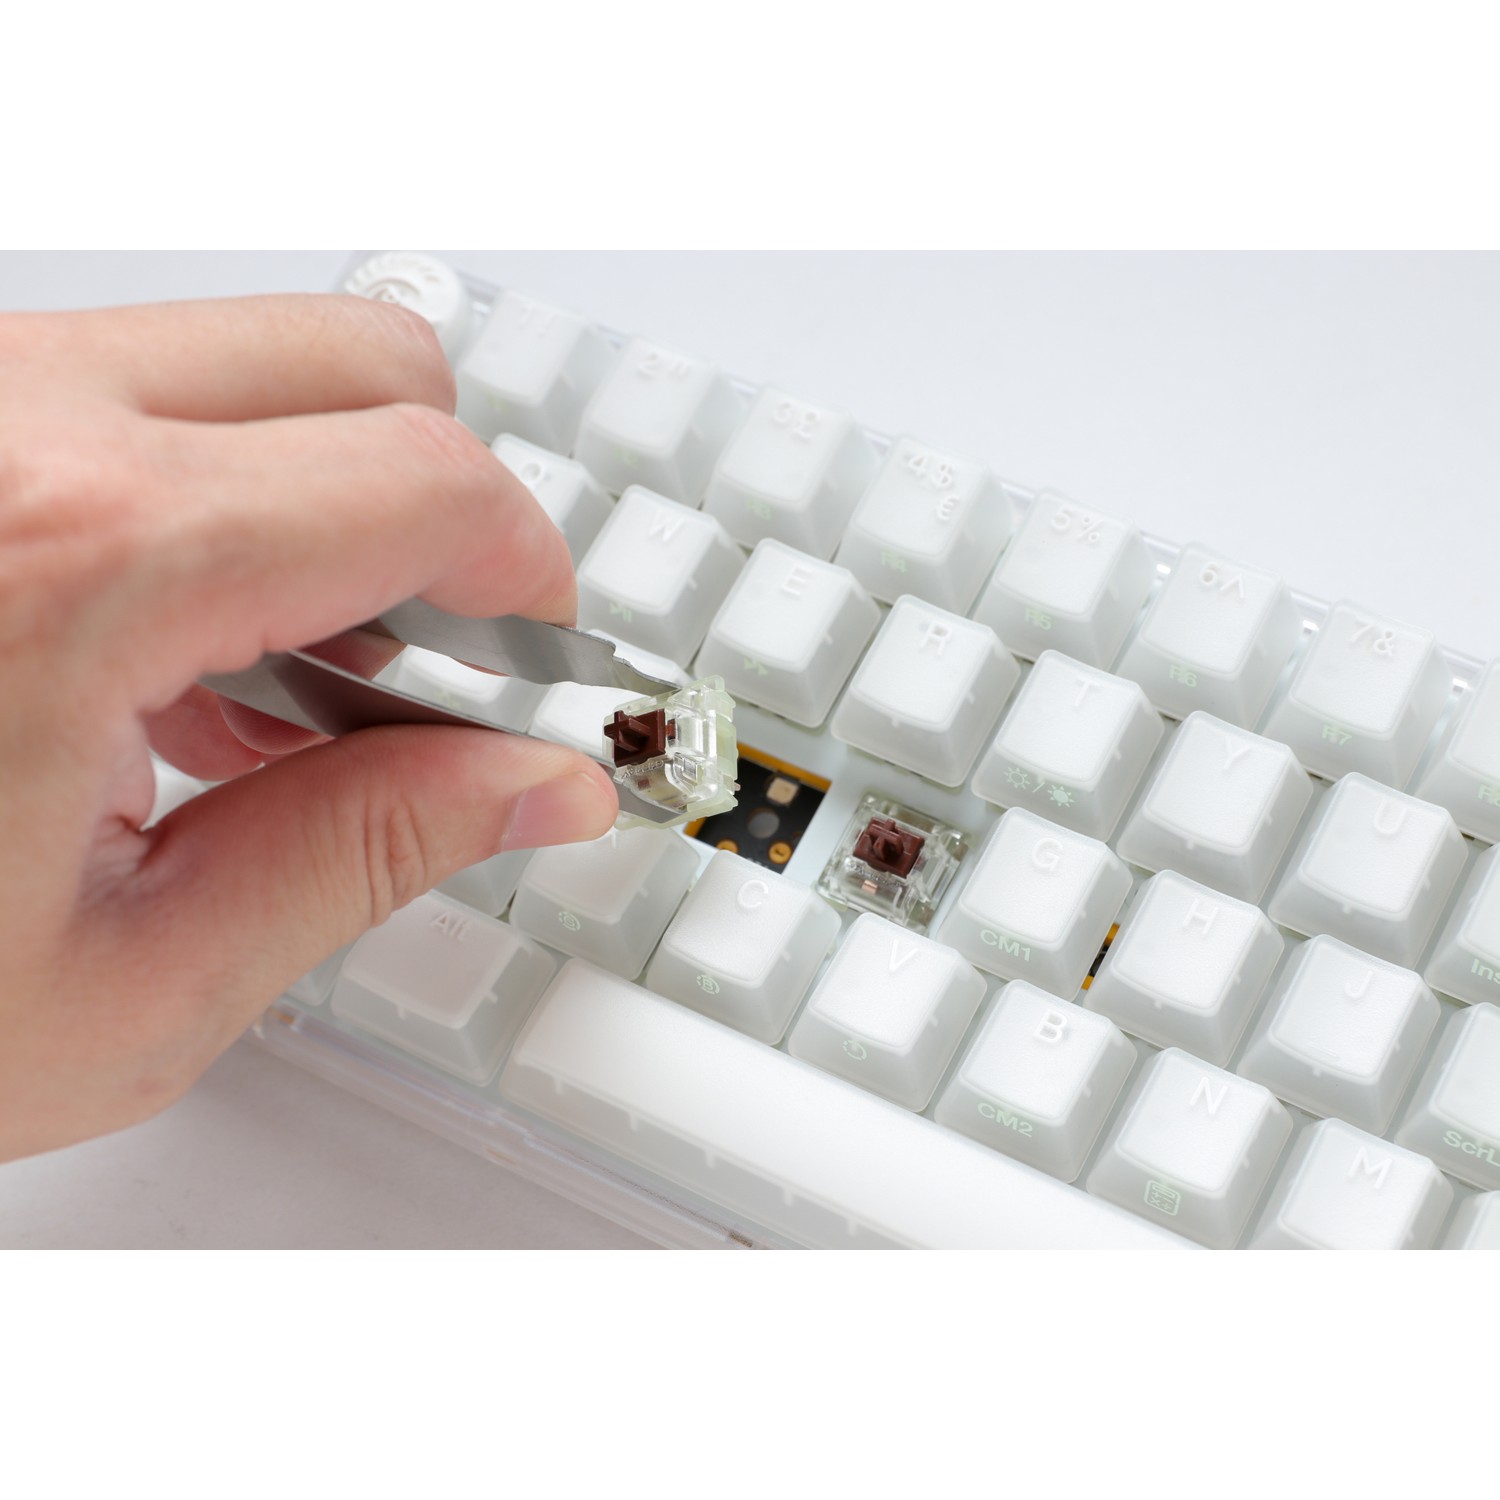 Ducky One 3 Aura SF 65% Mechanical Gaming Keyboard White Frame Cherry Brown Switch UK Layout